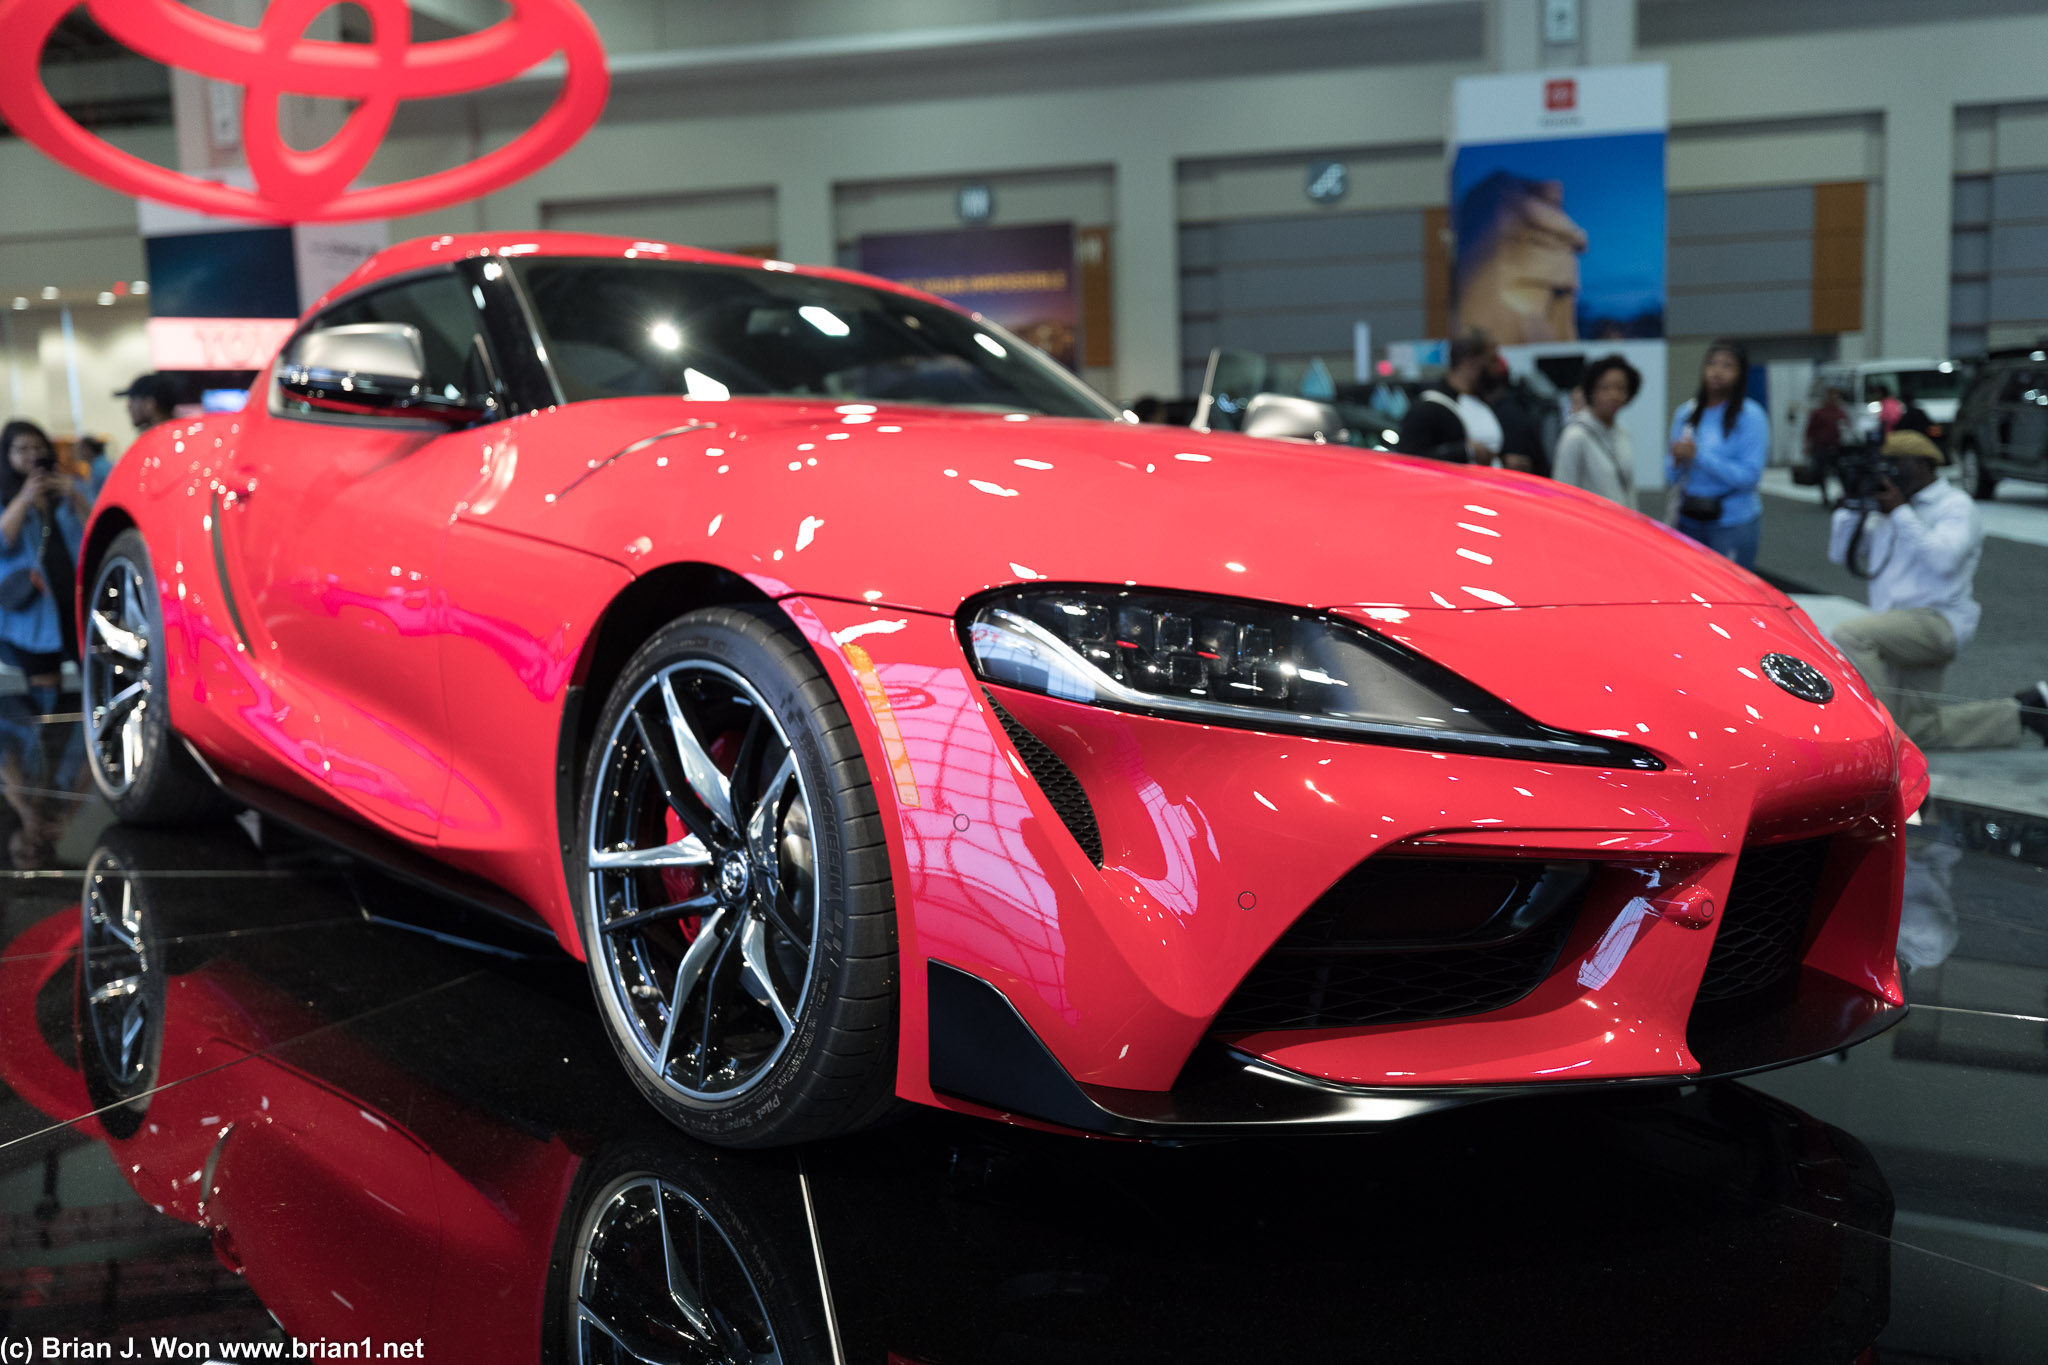 Toyota Supra. Too bad it's automatic only.